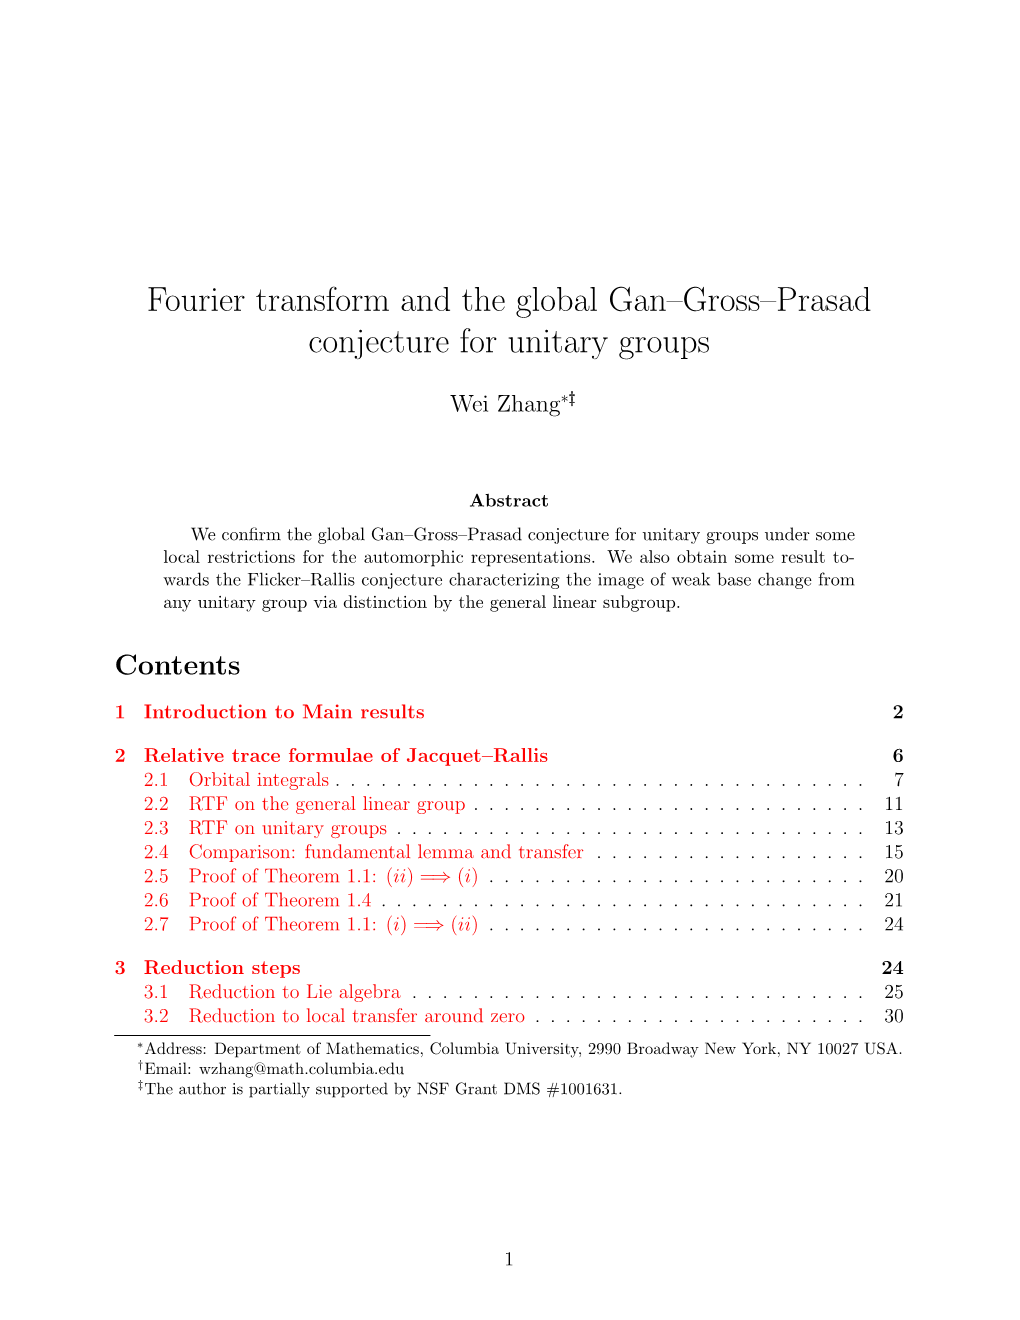 Fourier Transform and the Global Gan–Gross–Prasad Conjecture for Unitary Groups